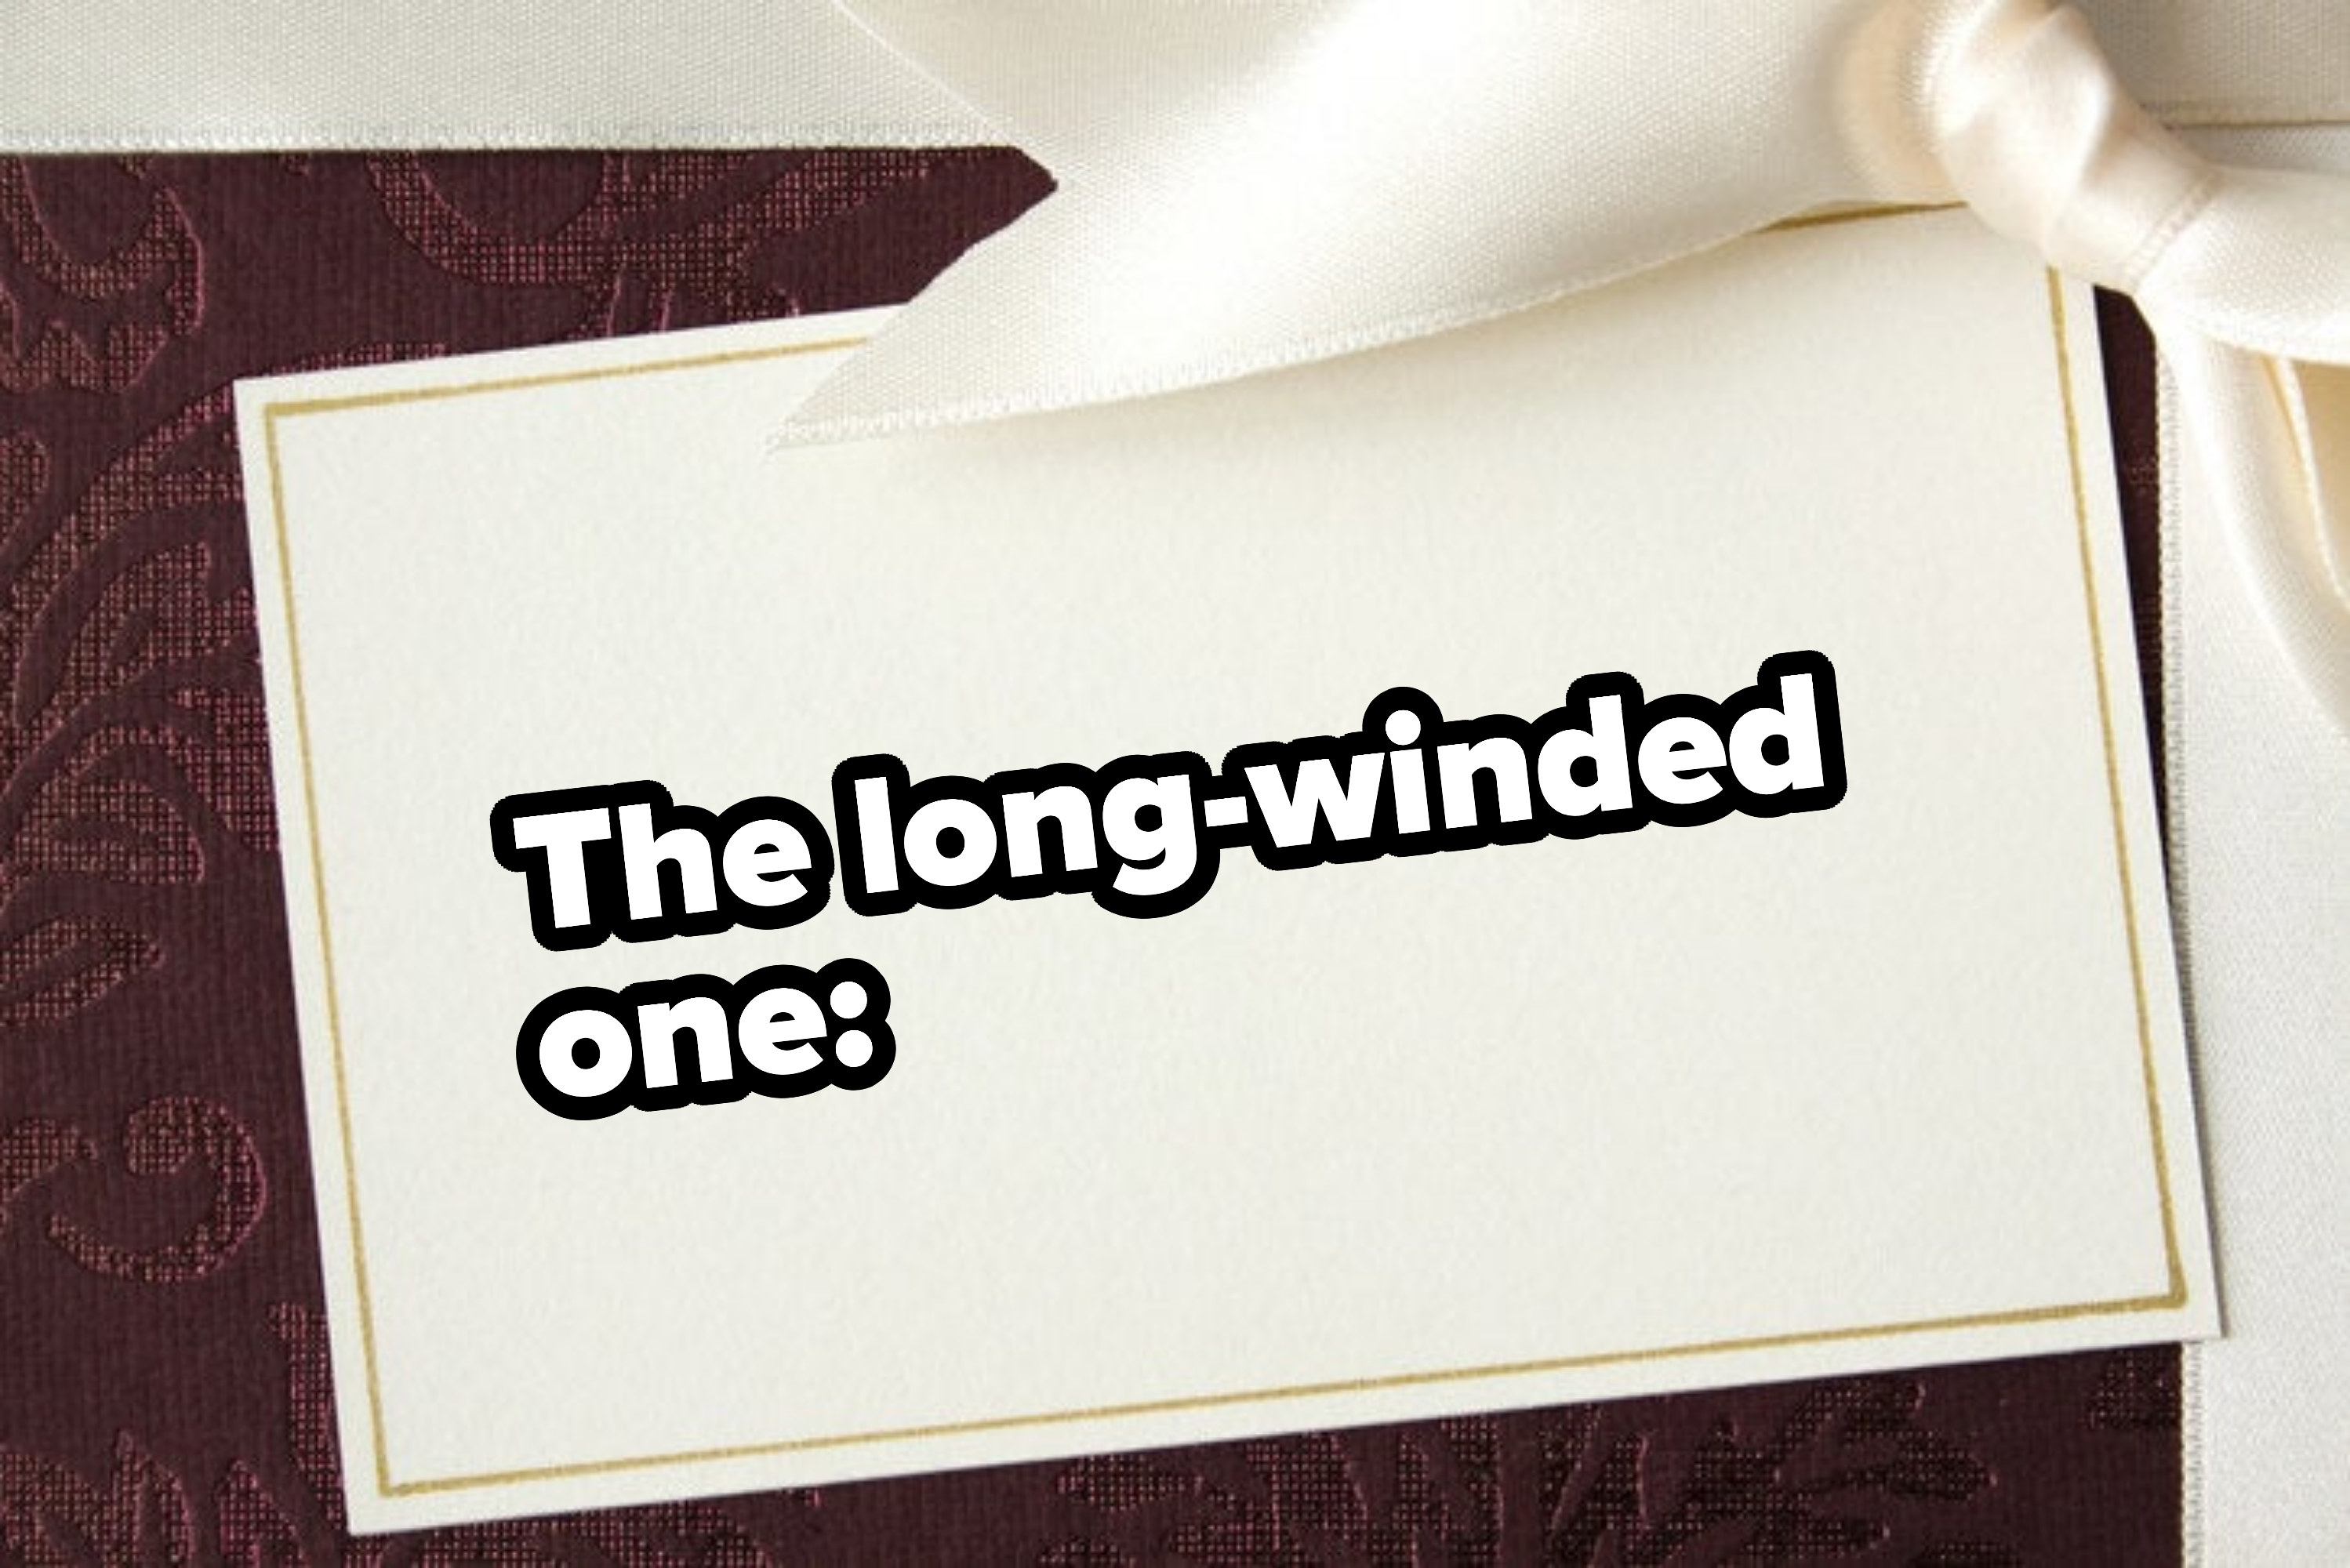 &quot;The long-winded one&quot;